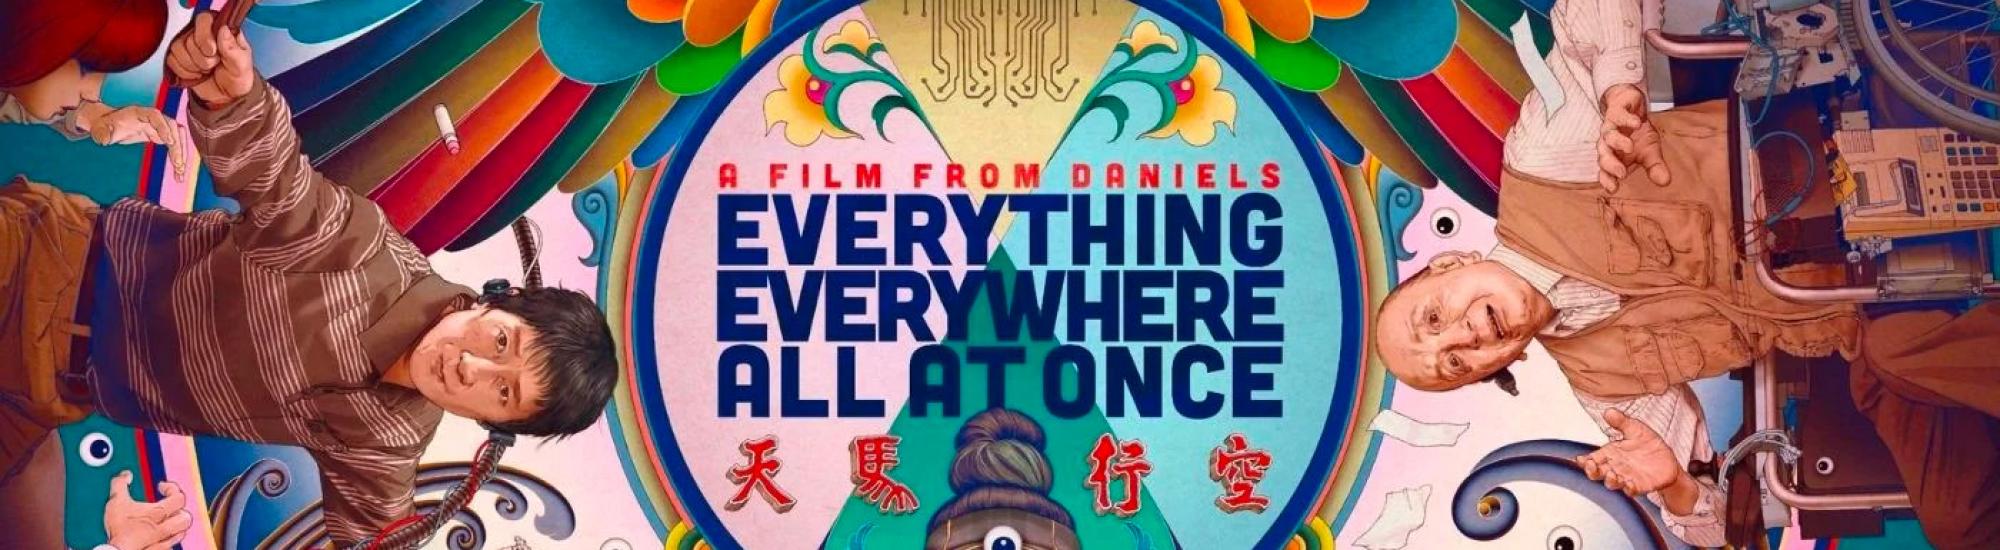 Everything Everywhere All at Once movie banner